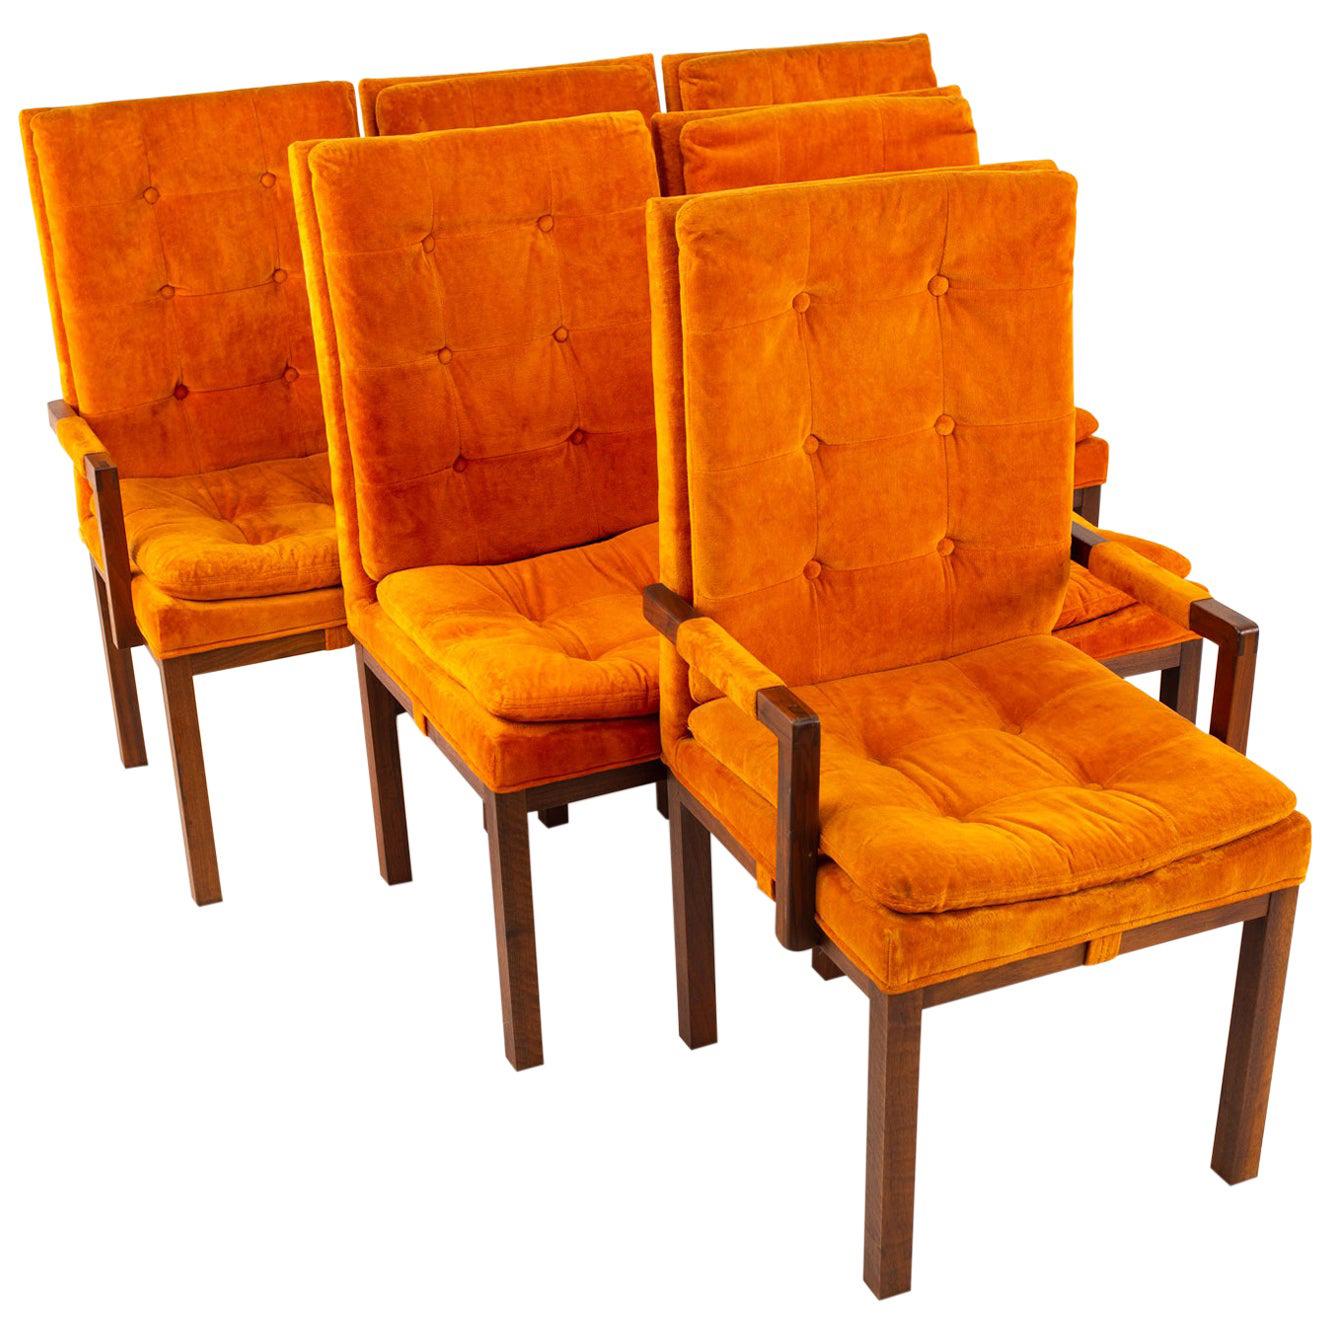 Milo Baughman Style Dillingham Orange and Walnut Upholstered Dining Chairs - Set